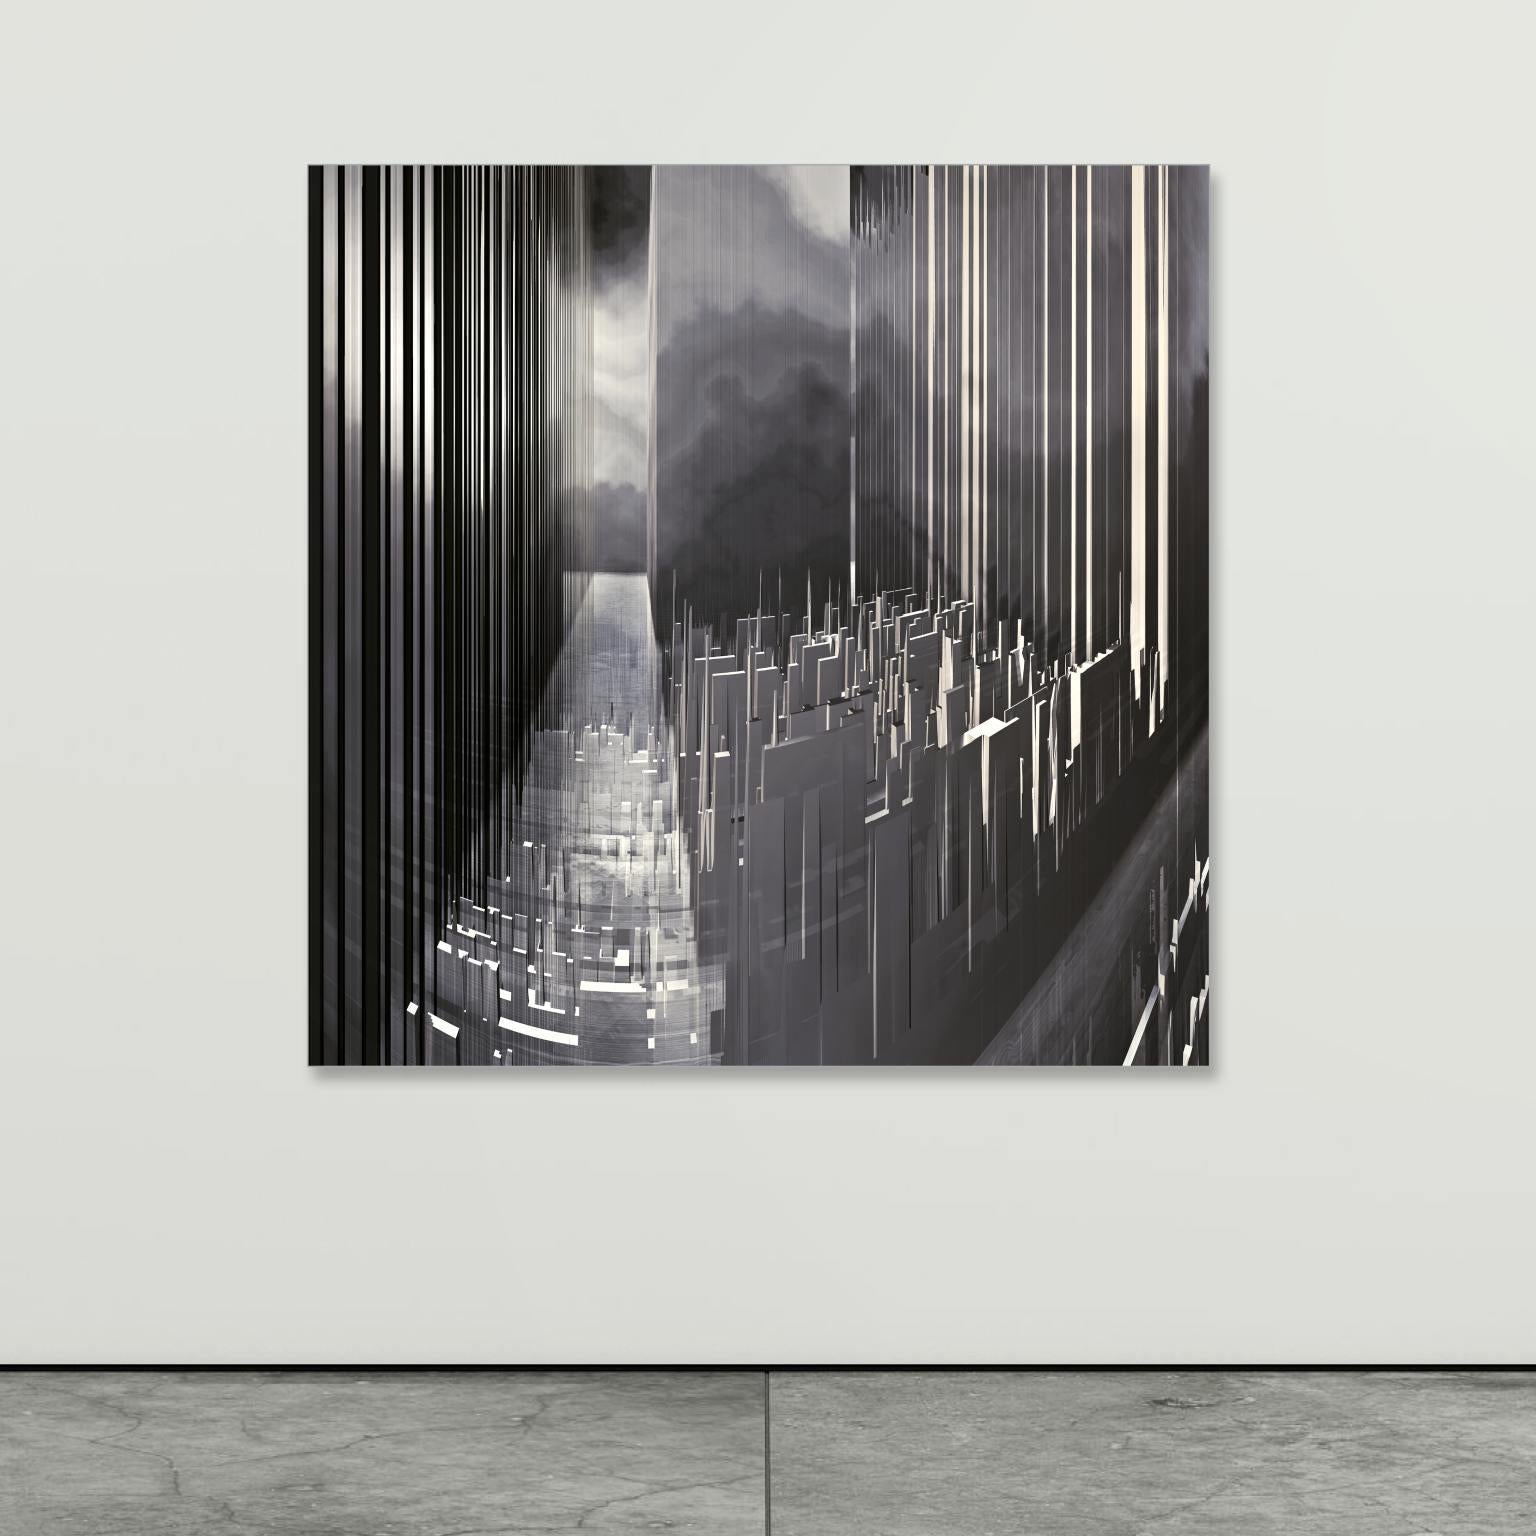 City Landcuts - Vision of a Urban Territory - Abstract Cityscapes - Photograph by Paul-Émile Rioux